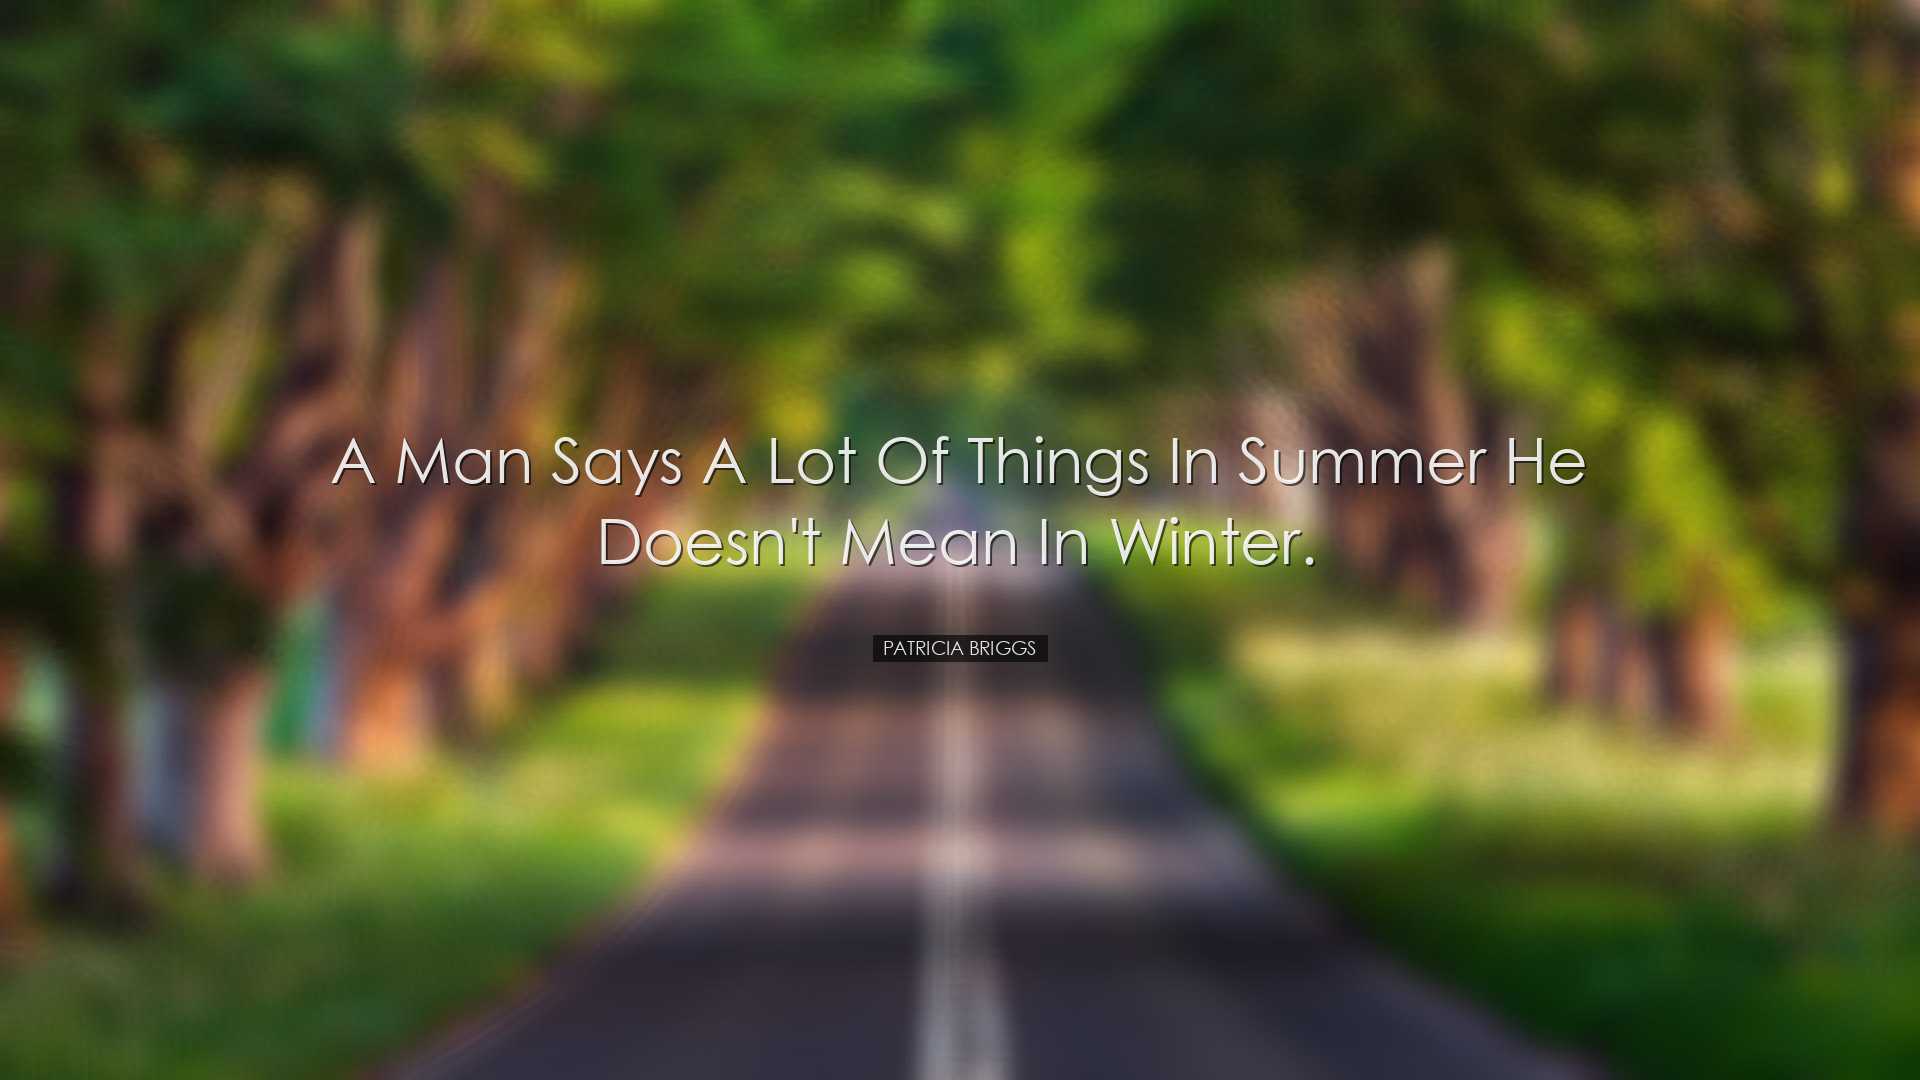 A man says a lot of things in summer he doesn't mean in winter. -